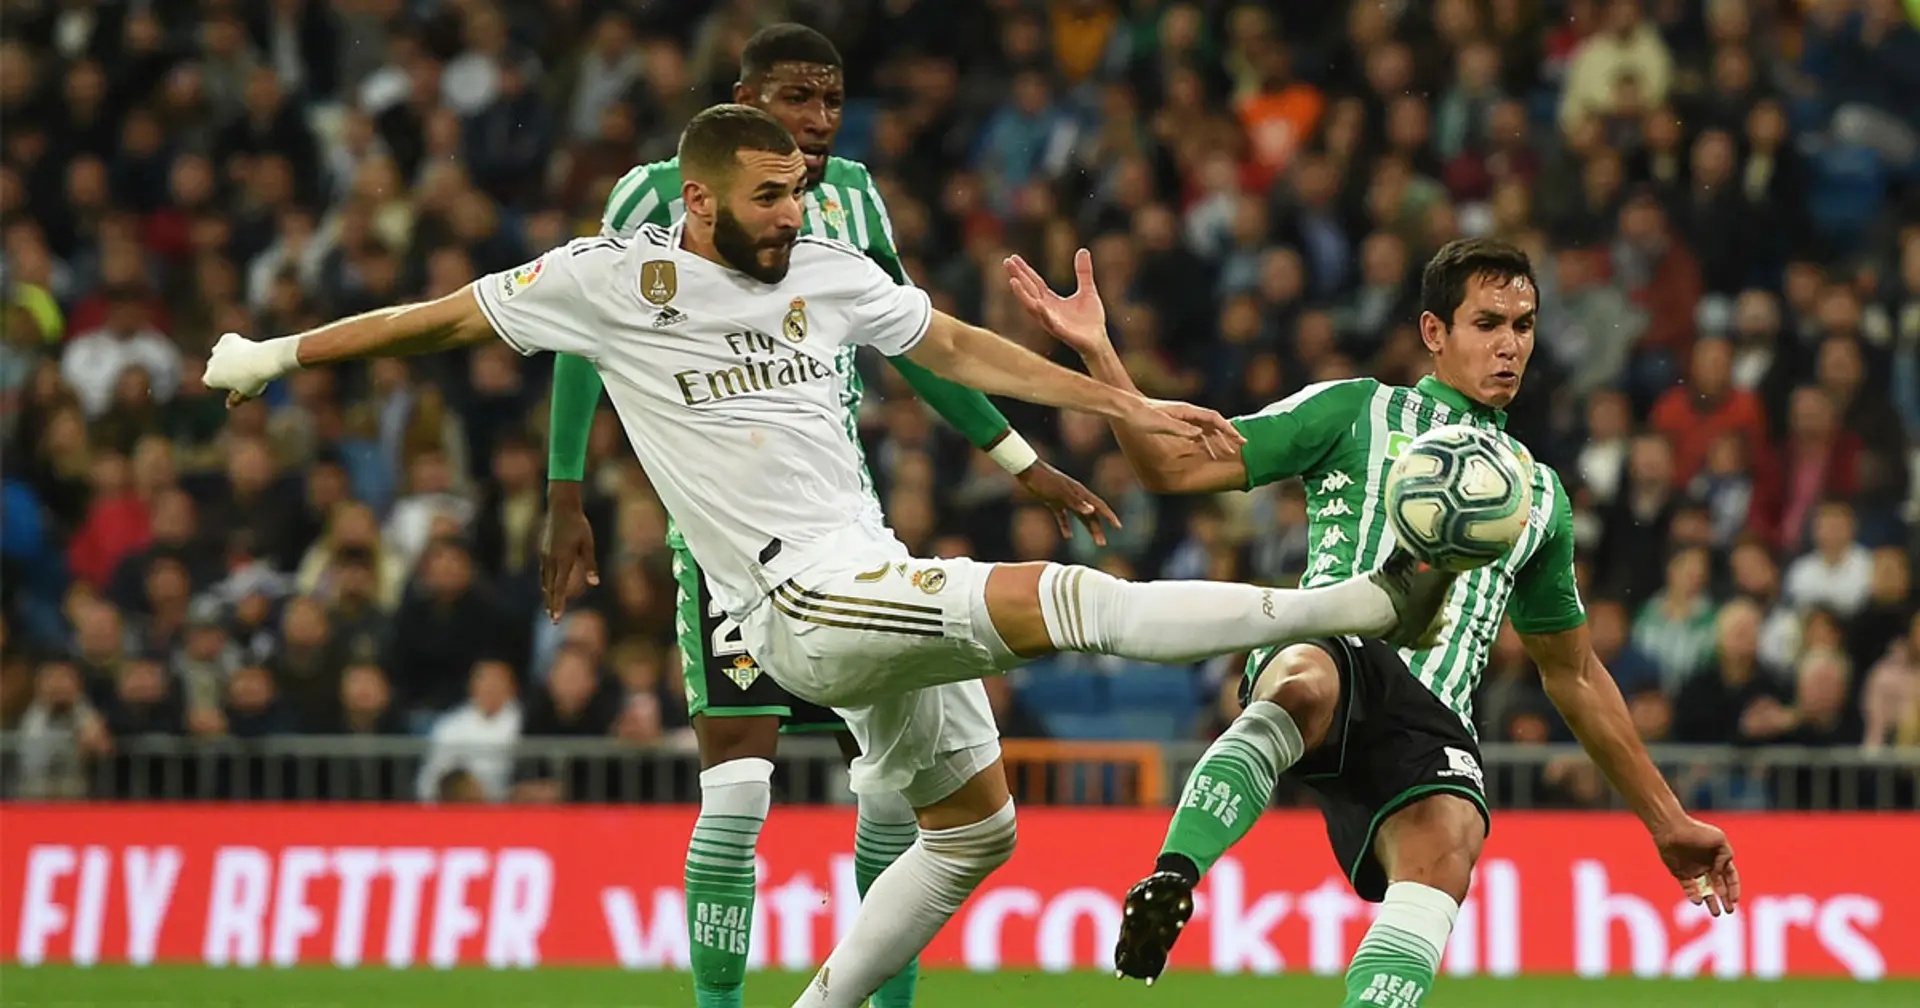 Real Betis vs Real Madrid: Score predictions, probable lineups & more – preview